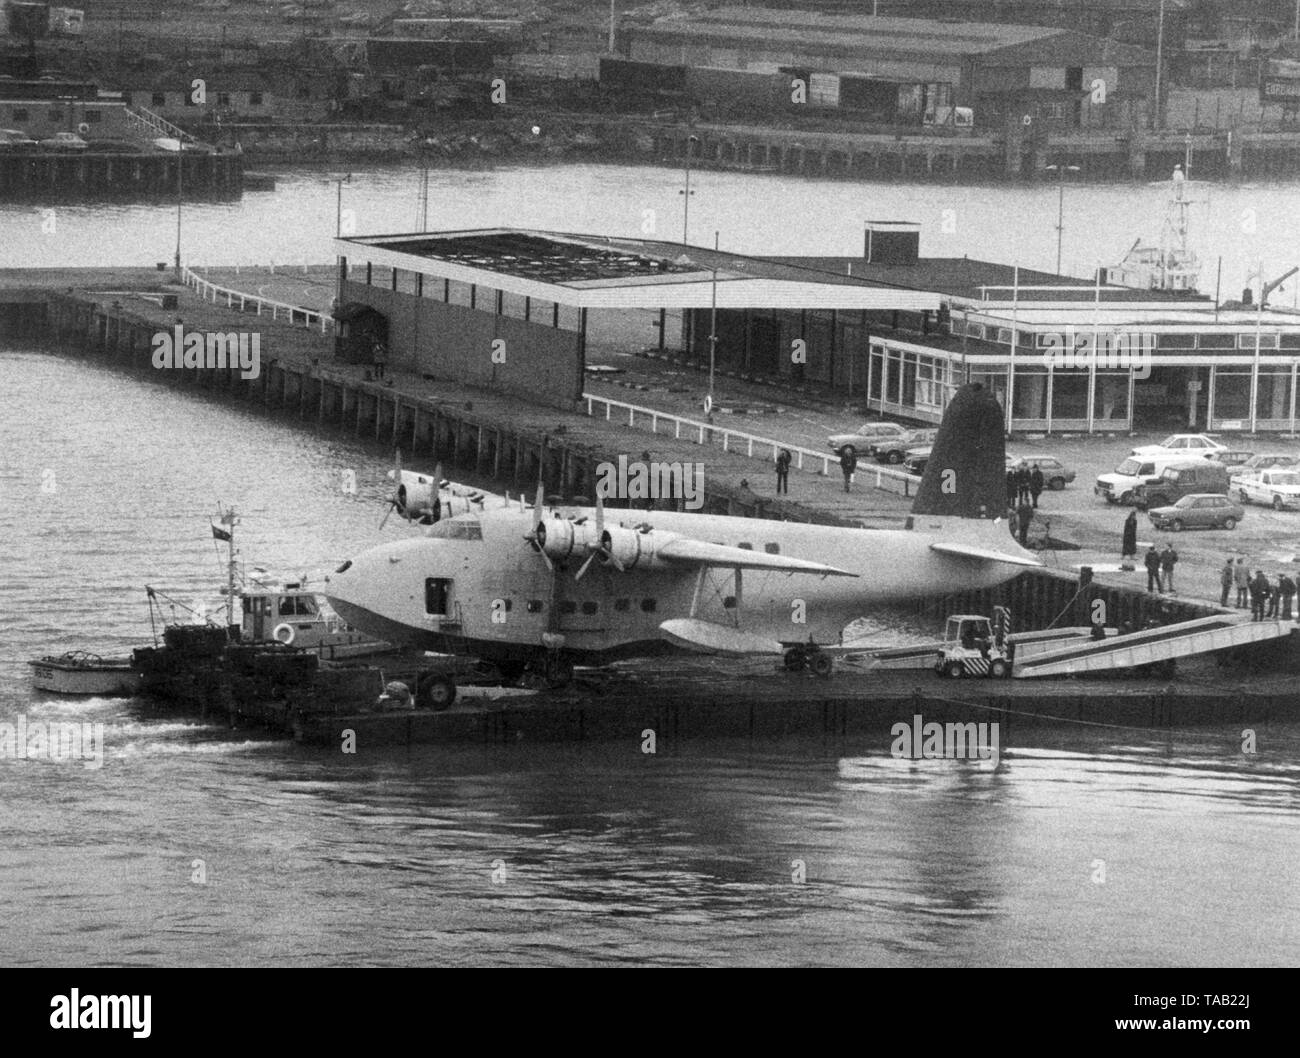 AJAXNETPHOTO. 1983. SOUTHAMPTON, ENGLAND. -  MUSEUM BOUND - THE SHORT SANDRINGHAM FLYING BOAT SOUTHERN CROSS (EX BEACHCOMBER) BUILT IN 1943, ABOUT TO BE HAULED ASHORE IN SOUTHAMPTON DOCKS FROM AN ARMY MEXEFLOAT PONTOON FOLLOWING ITS SHORT VOYAGE FROM CALSHOT. THE PLANE HELD THE RECORD FOR THE TOTAL NUMBER OF HOURS FLOWN AT 19,500 BY THE TYPE. AIRCRAFT WAS ORIGINALLY BUILT AS A SUNDERLAND PATROL BOMBER. PHOTO:JONATHAN EASTLAND/AJAX REF:2 83 Stock Photo